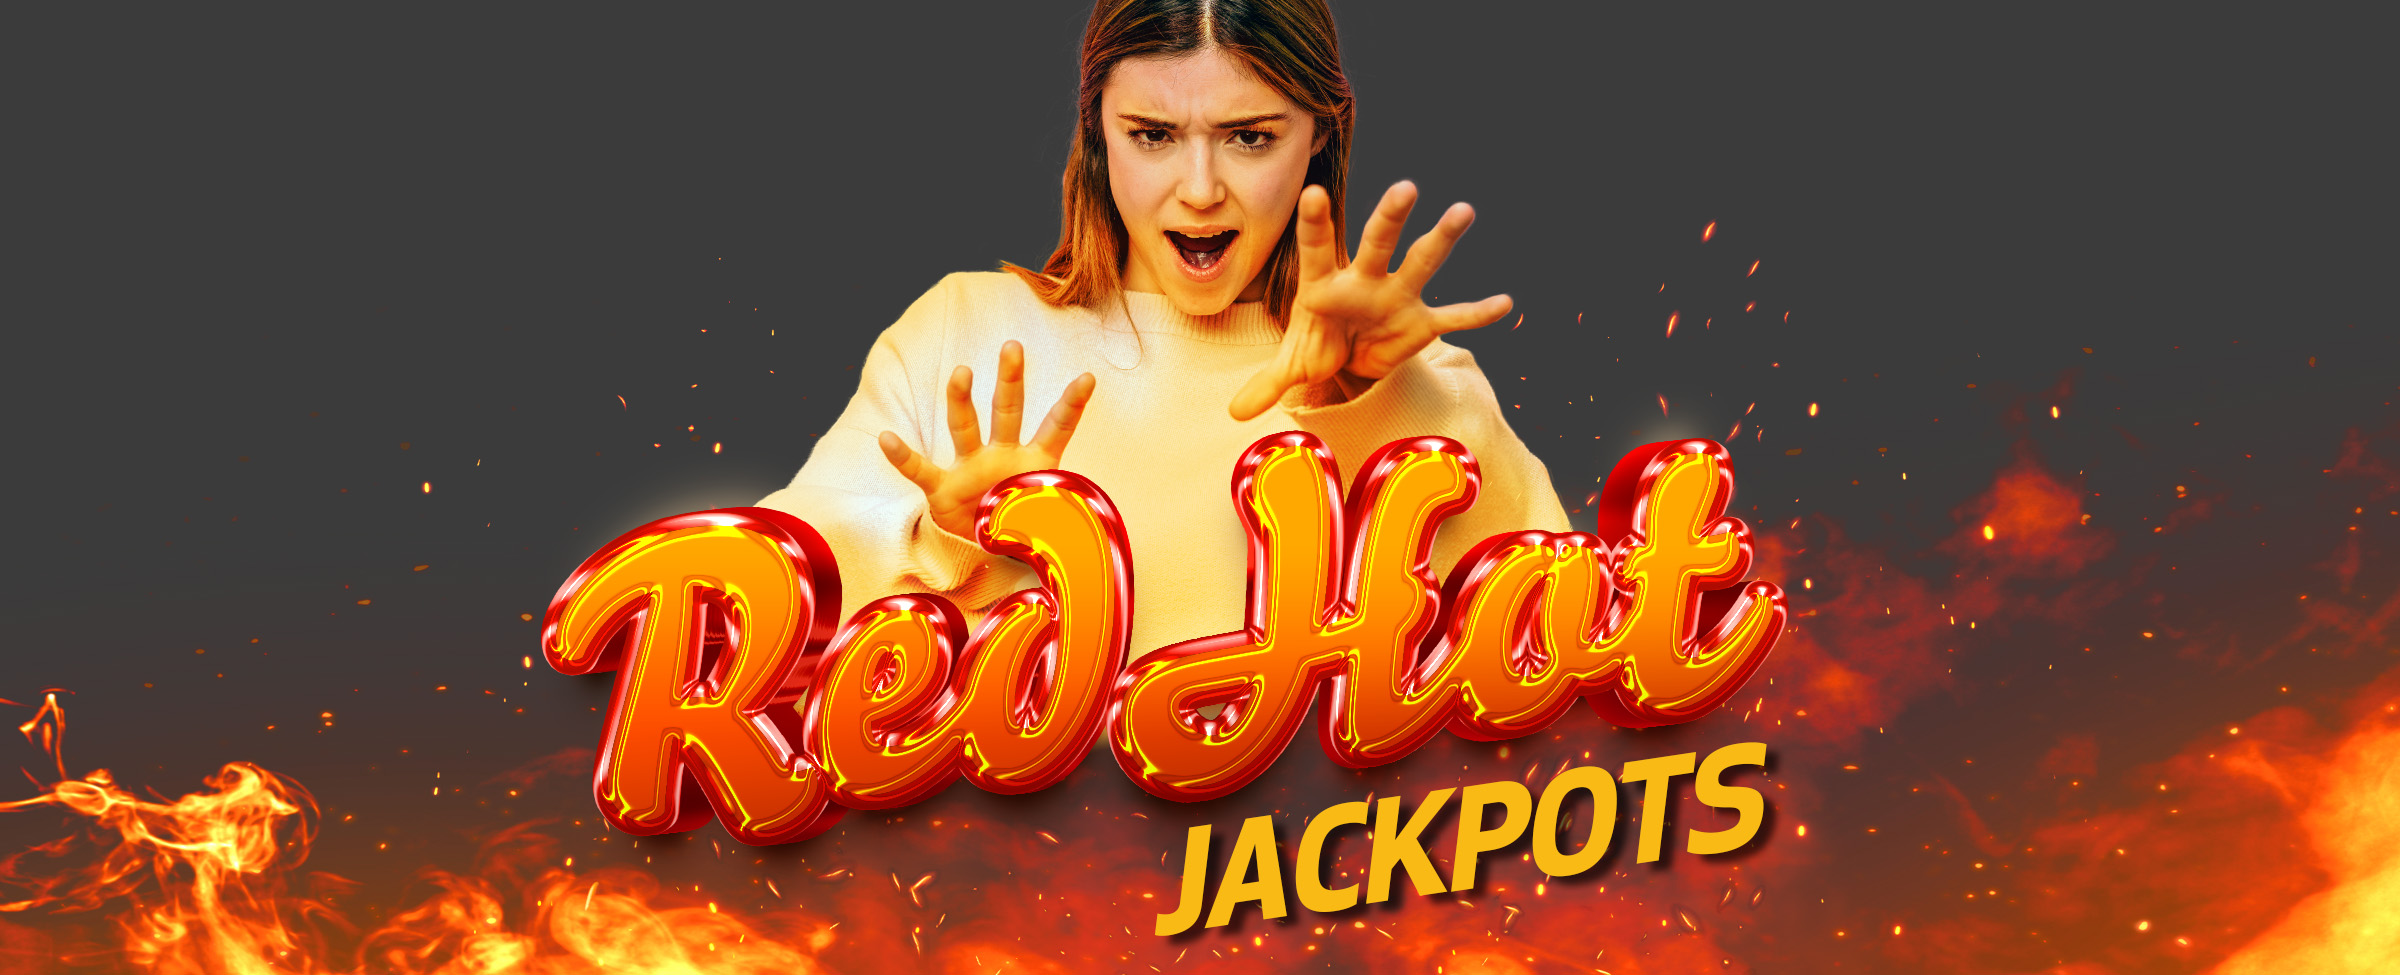 Red Hot Jackpots are here at Joe Fortune, waiting for you to strike the lucky timing. I mean really, isn’t that incentive enough?!